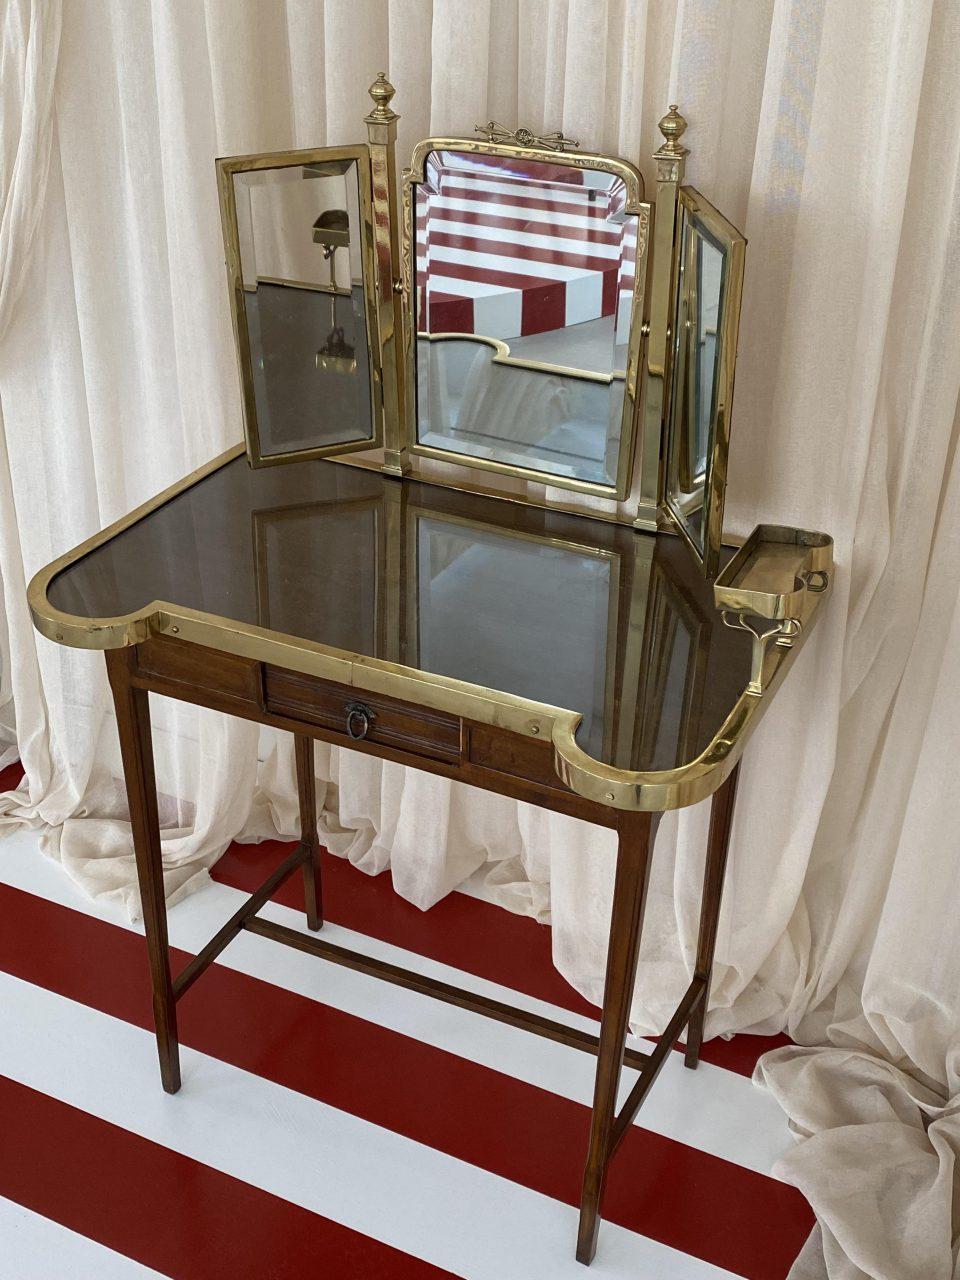 Sit down at this sophisticated dressing table / vanity, and live out your innermost princess dream.

Stylish, and extremely elegant 1920s French dressing table, in a gorgeous design, with a beautiful slim dark wood base and a 3-panelled brass